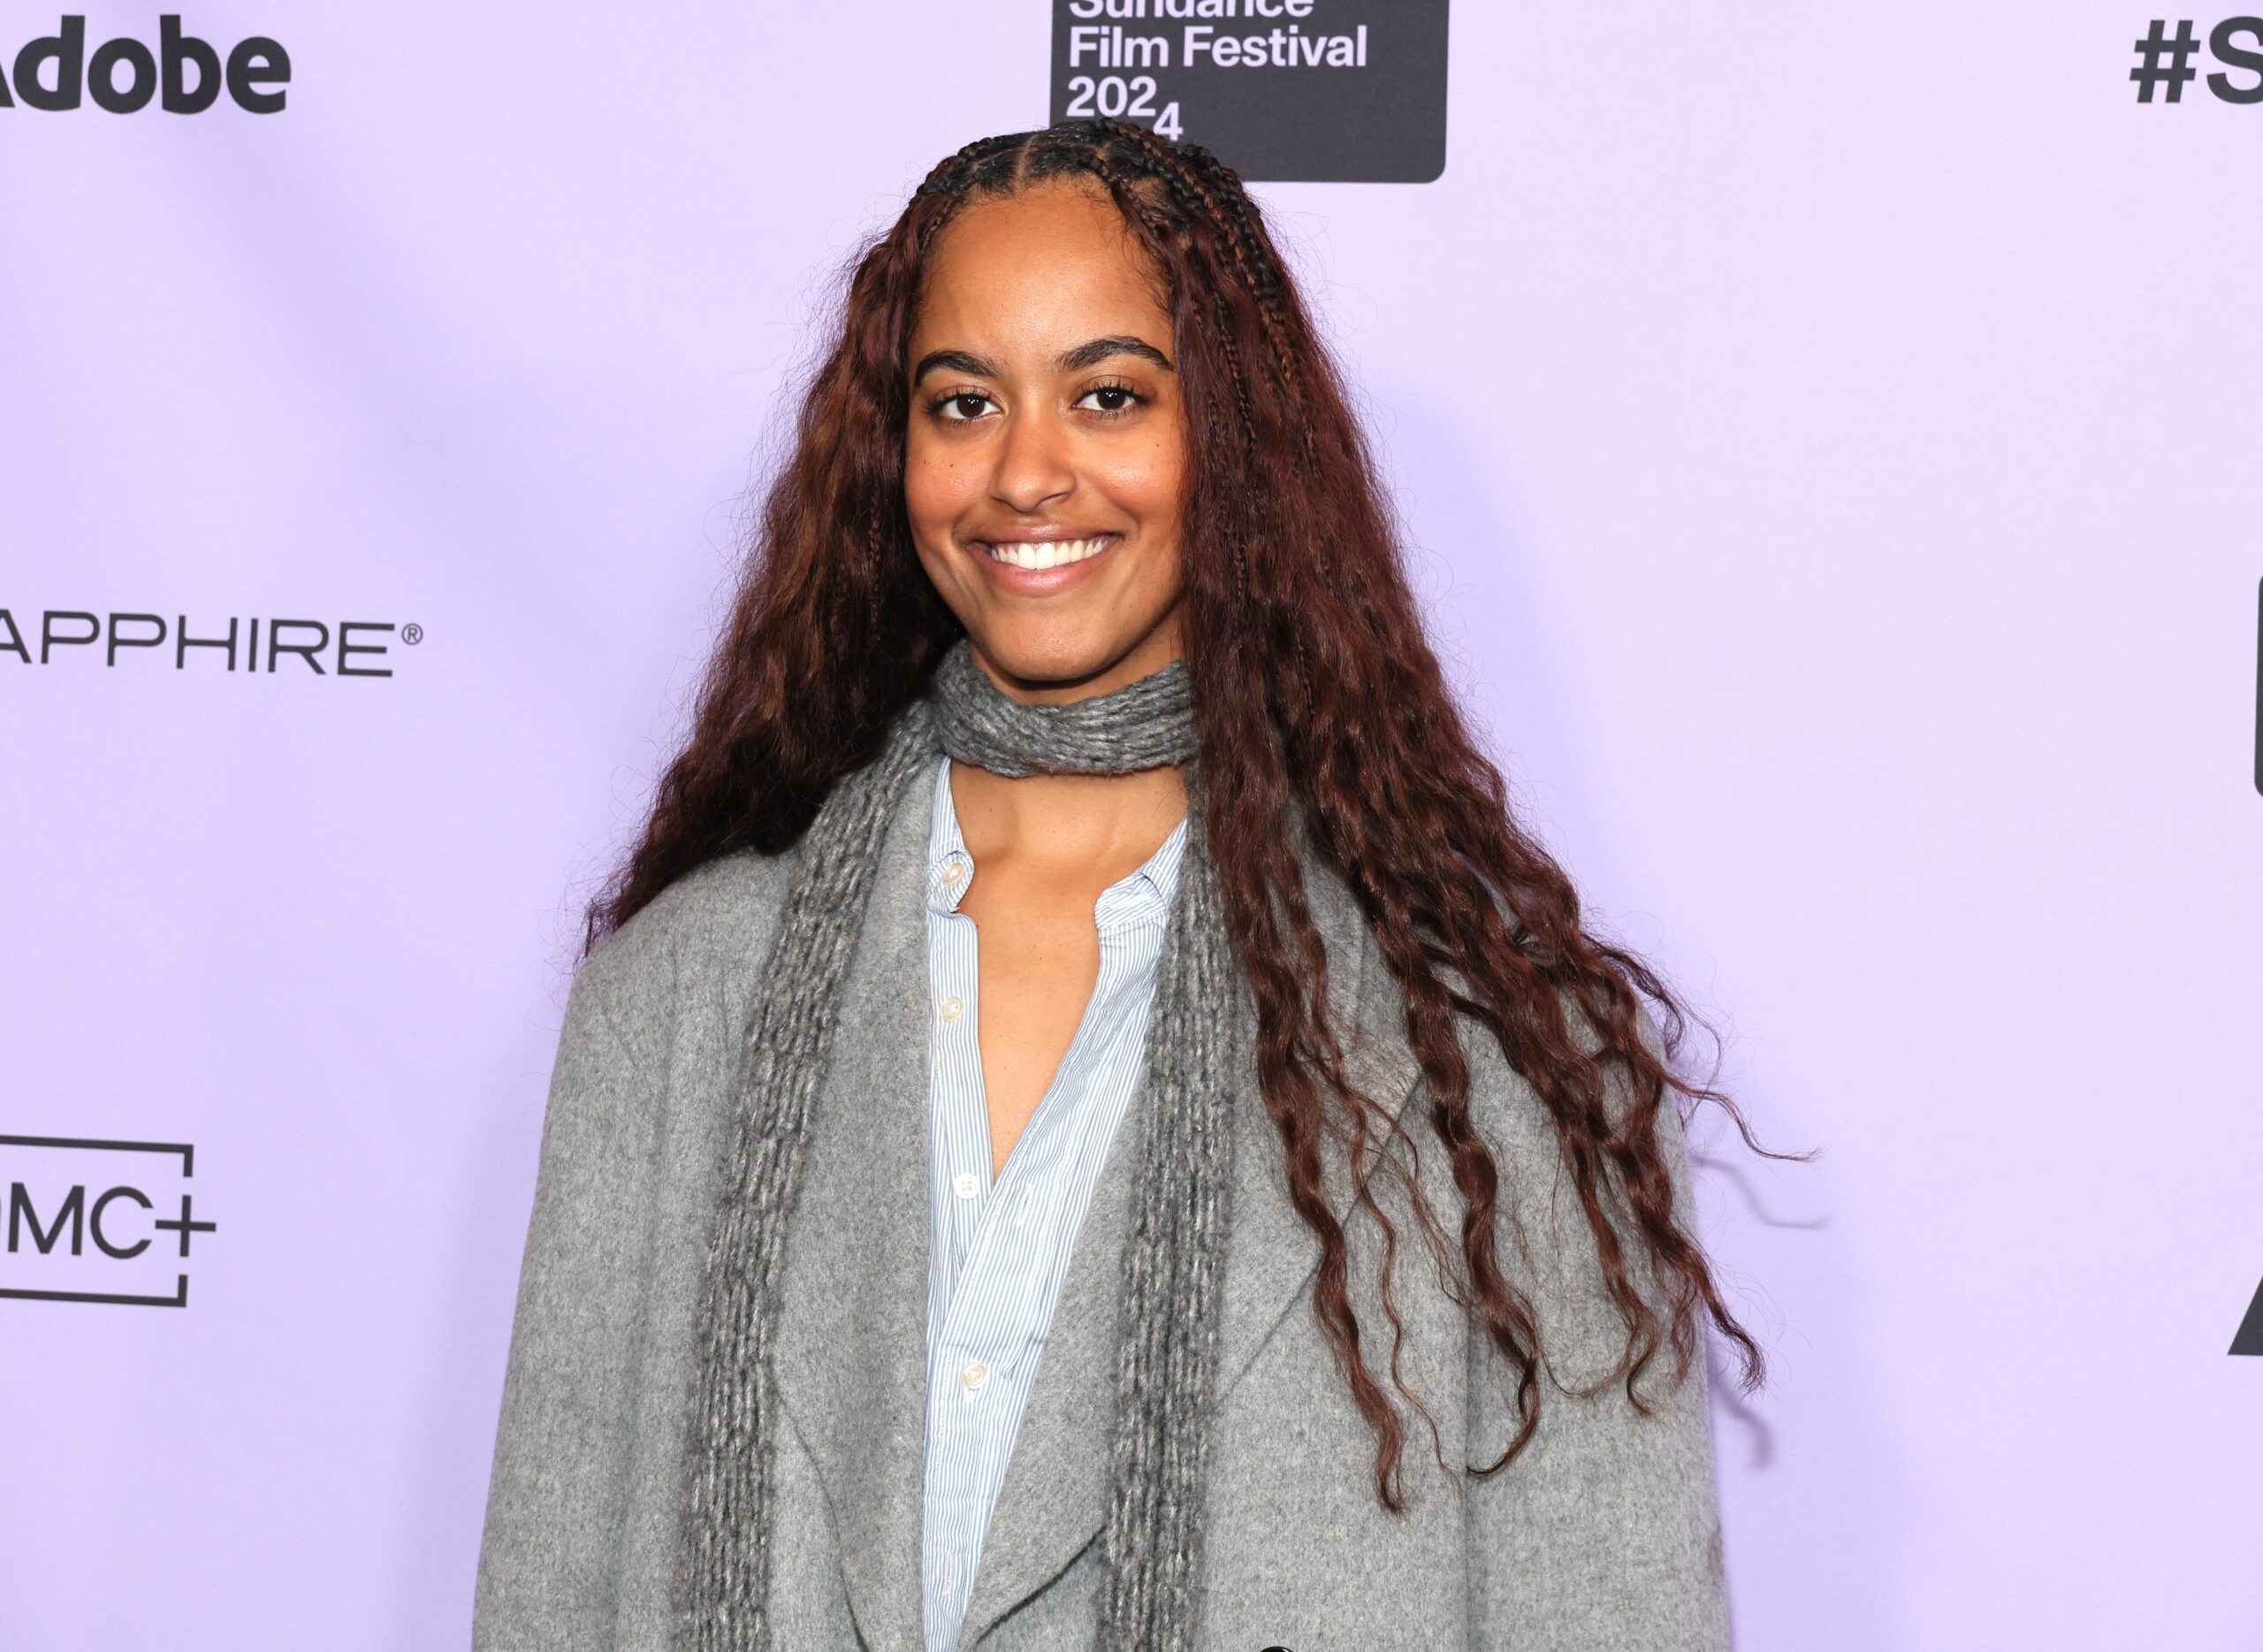 Malia Obama Genuinely Nailed the Indie Darling Facet at the Sundance Movie Festival